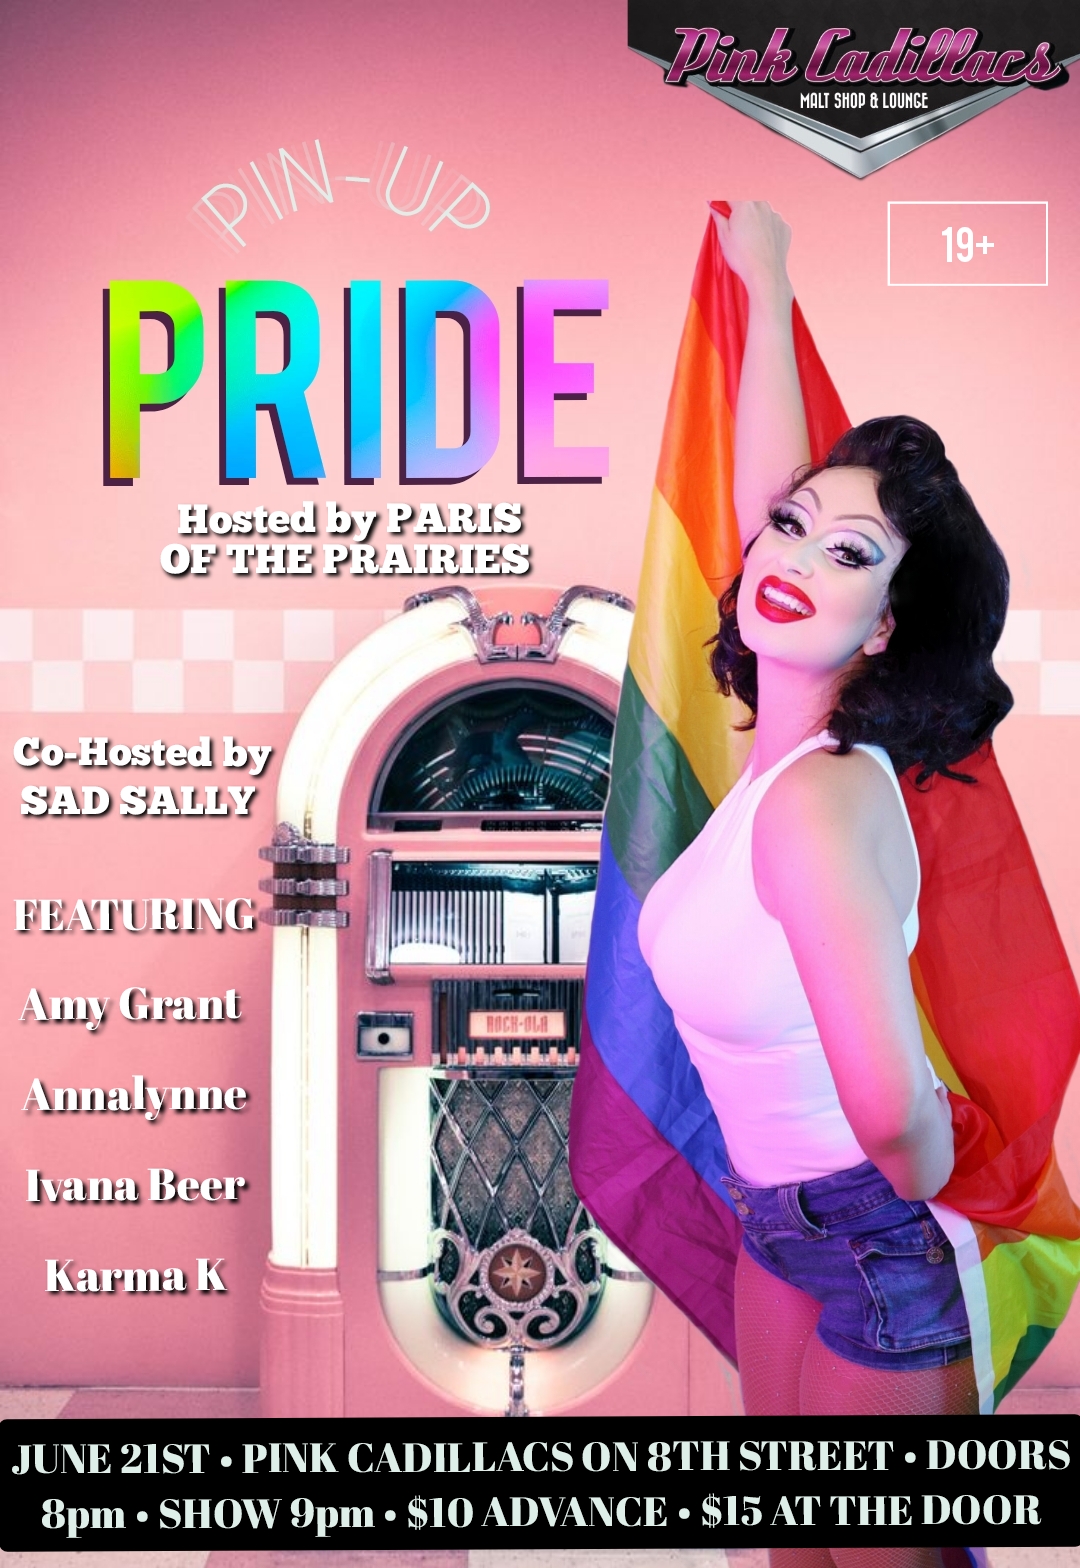 Poster for Pin-Up Pride event